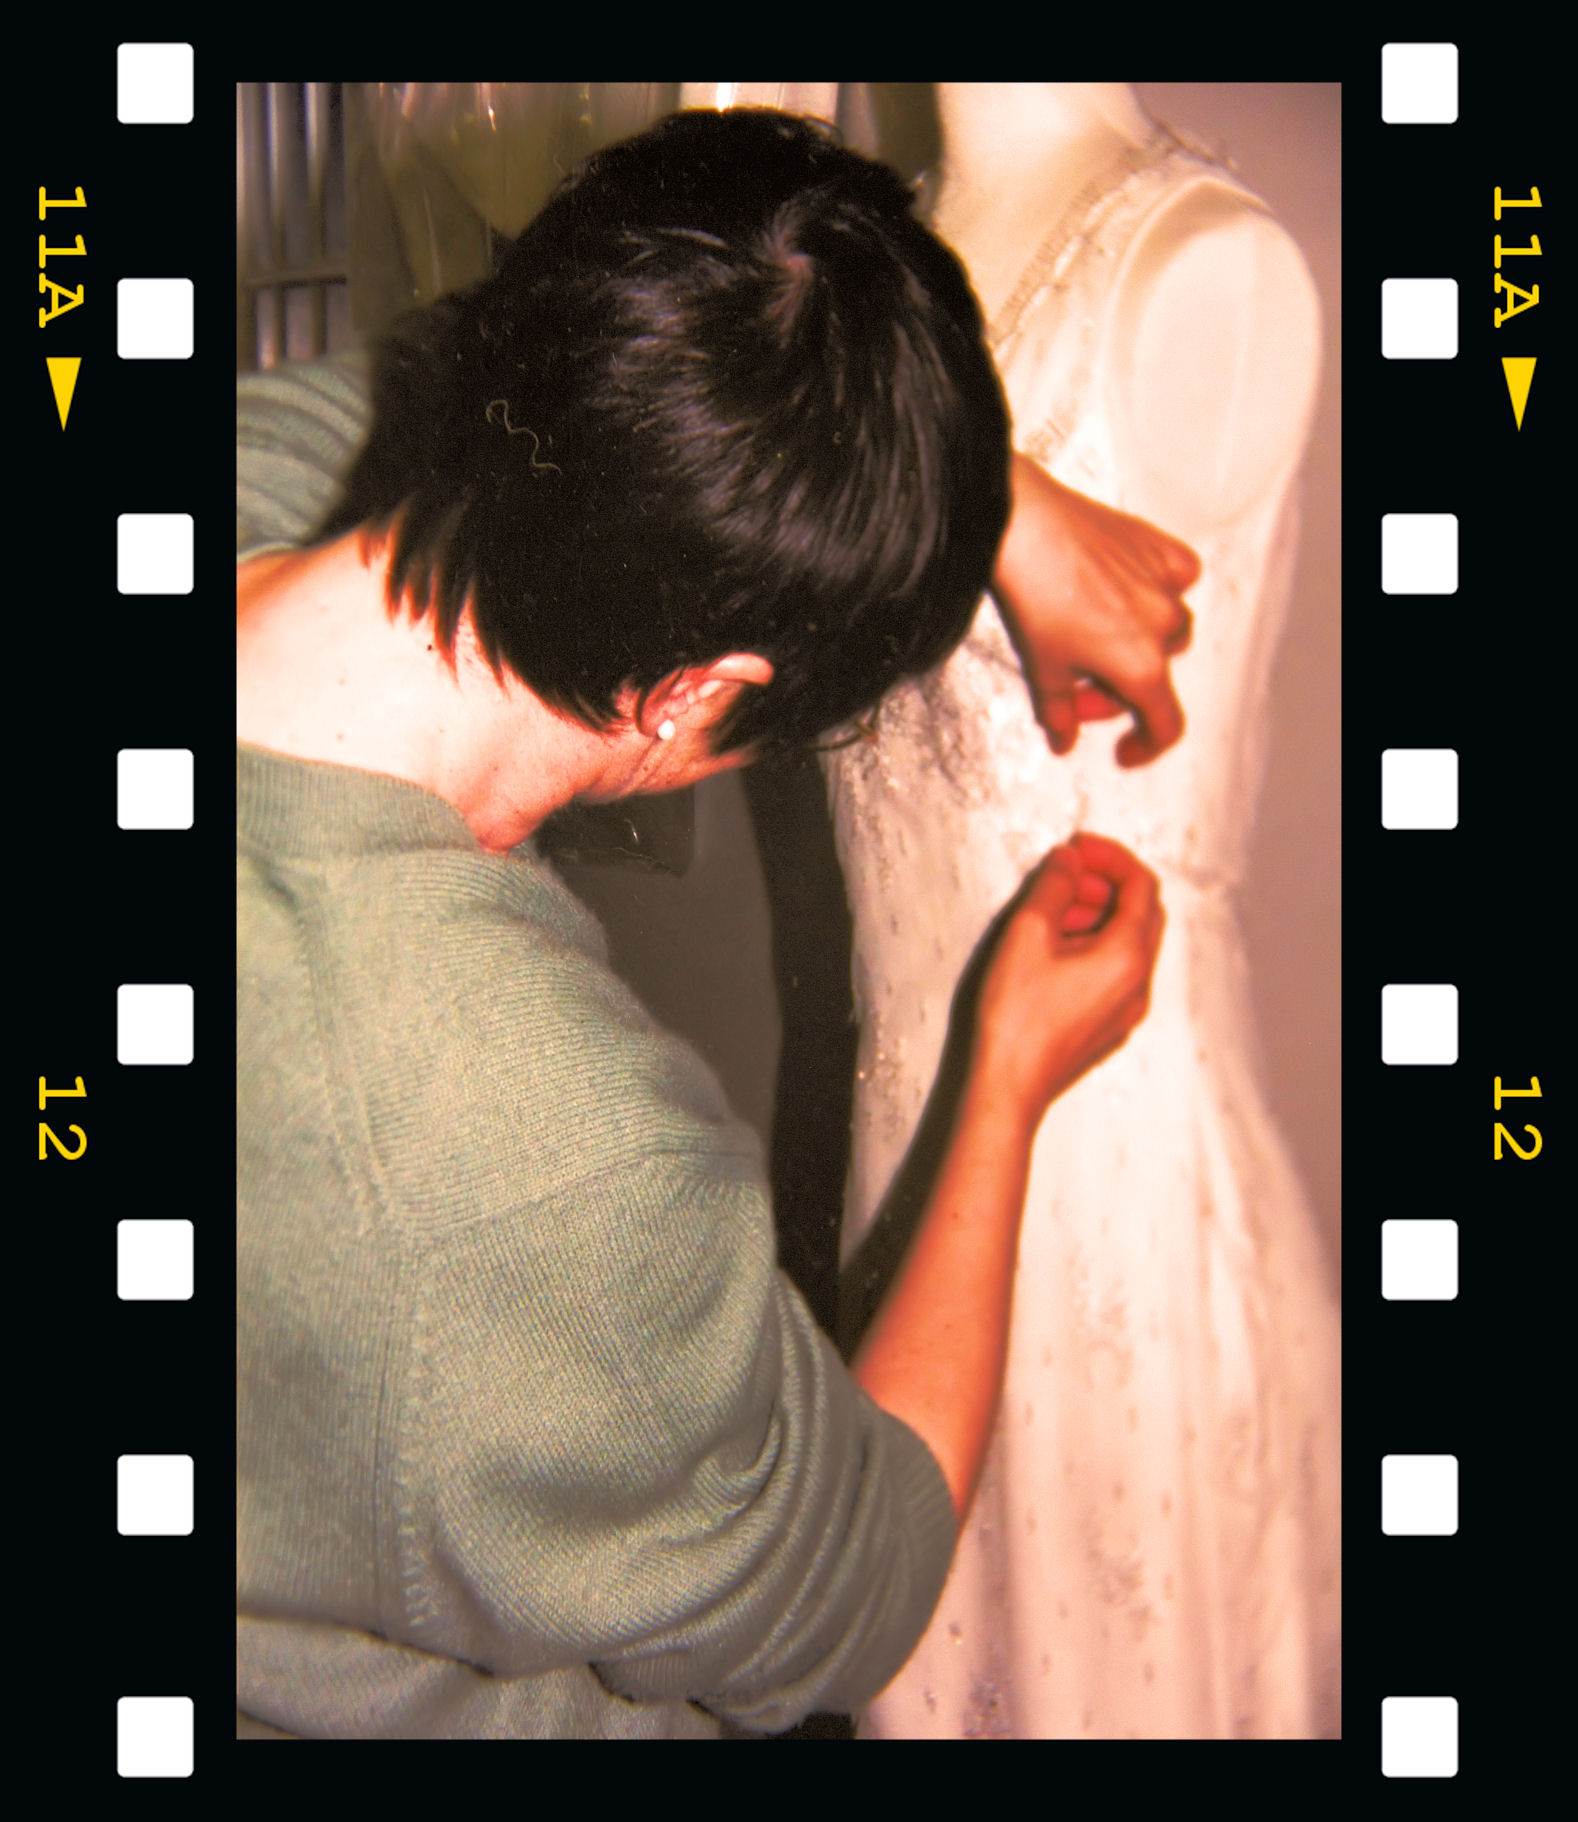 ...working on a wedding gown early in my career...